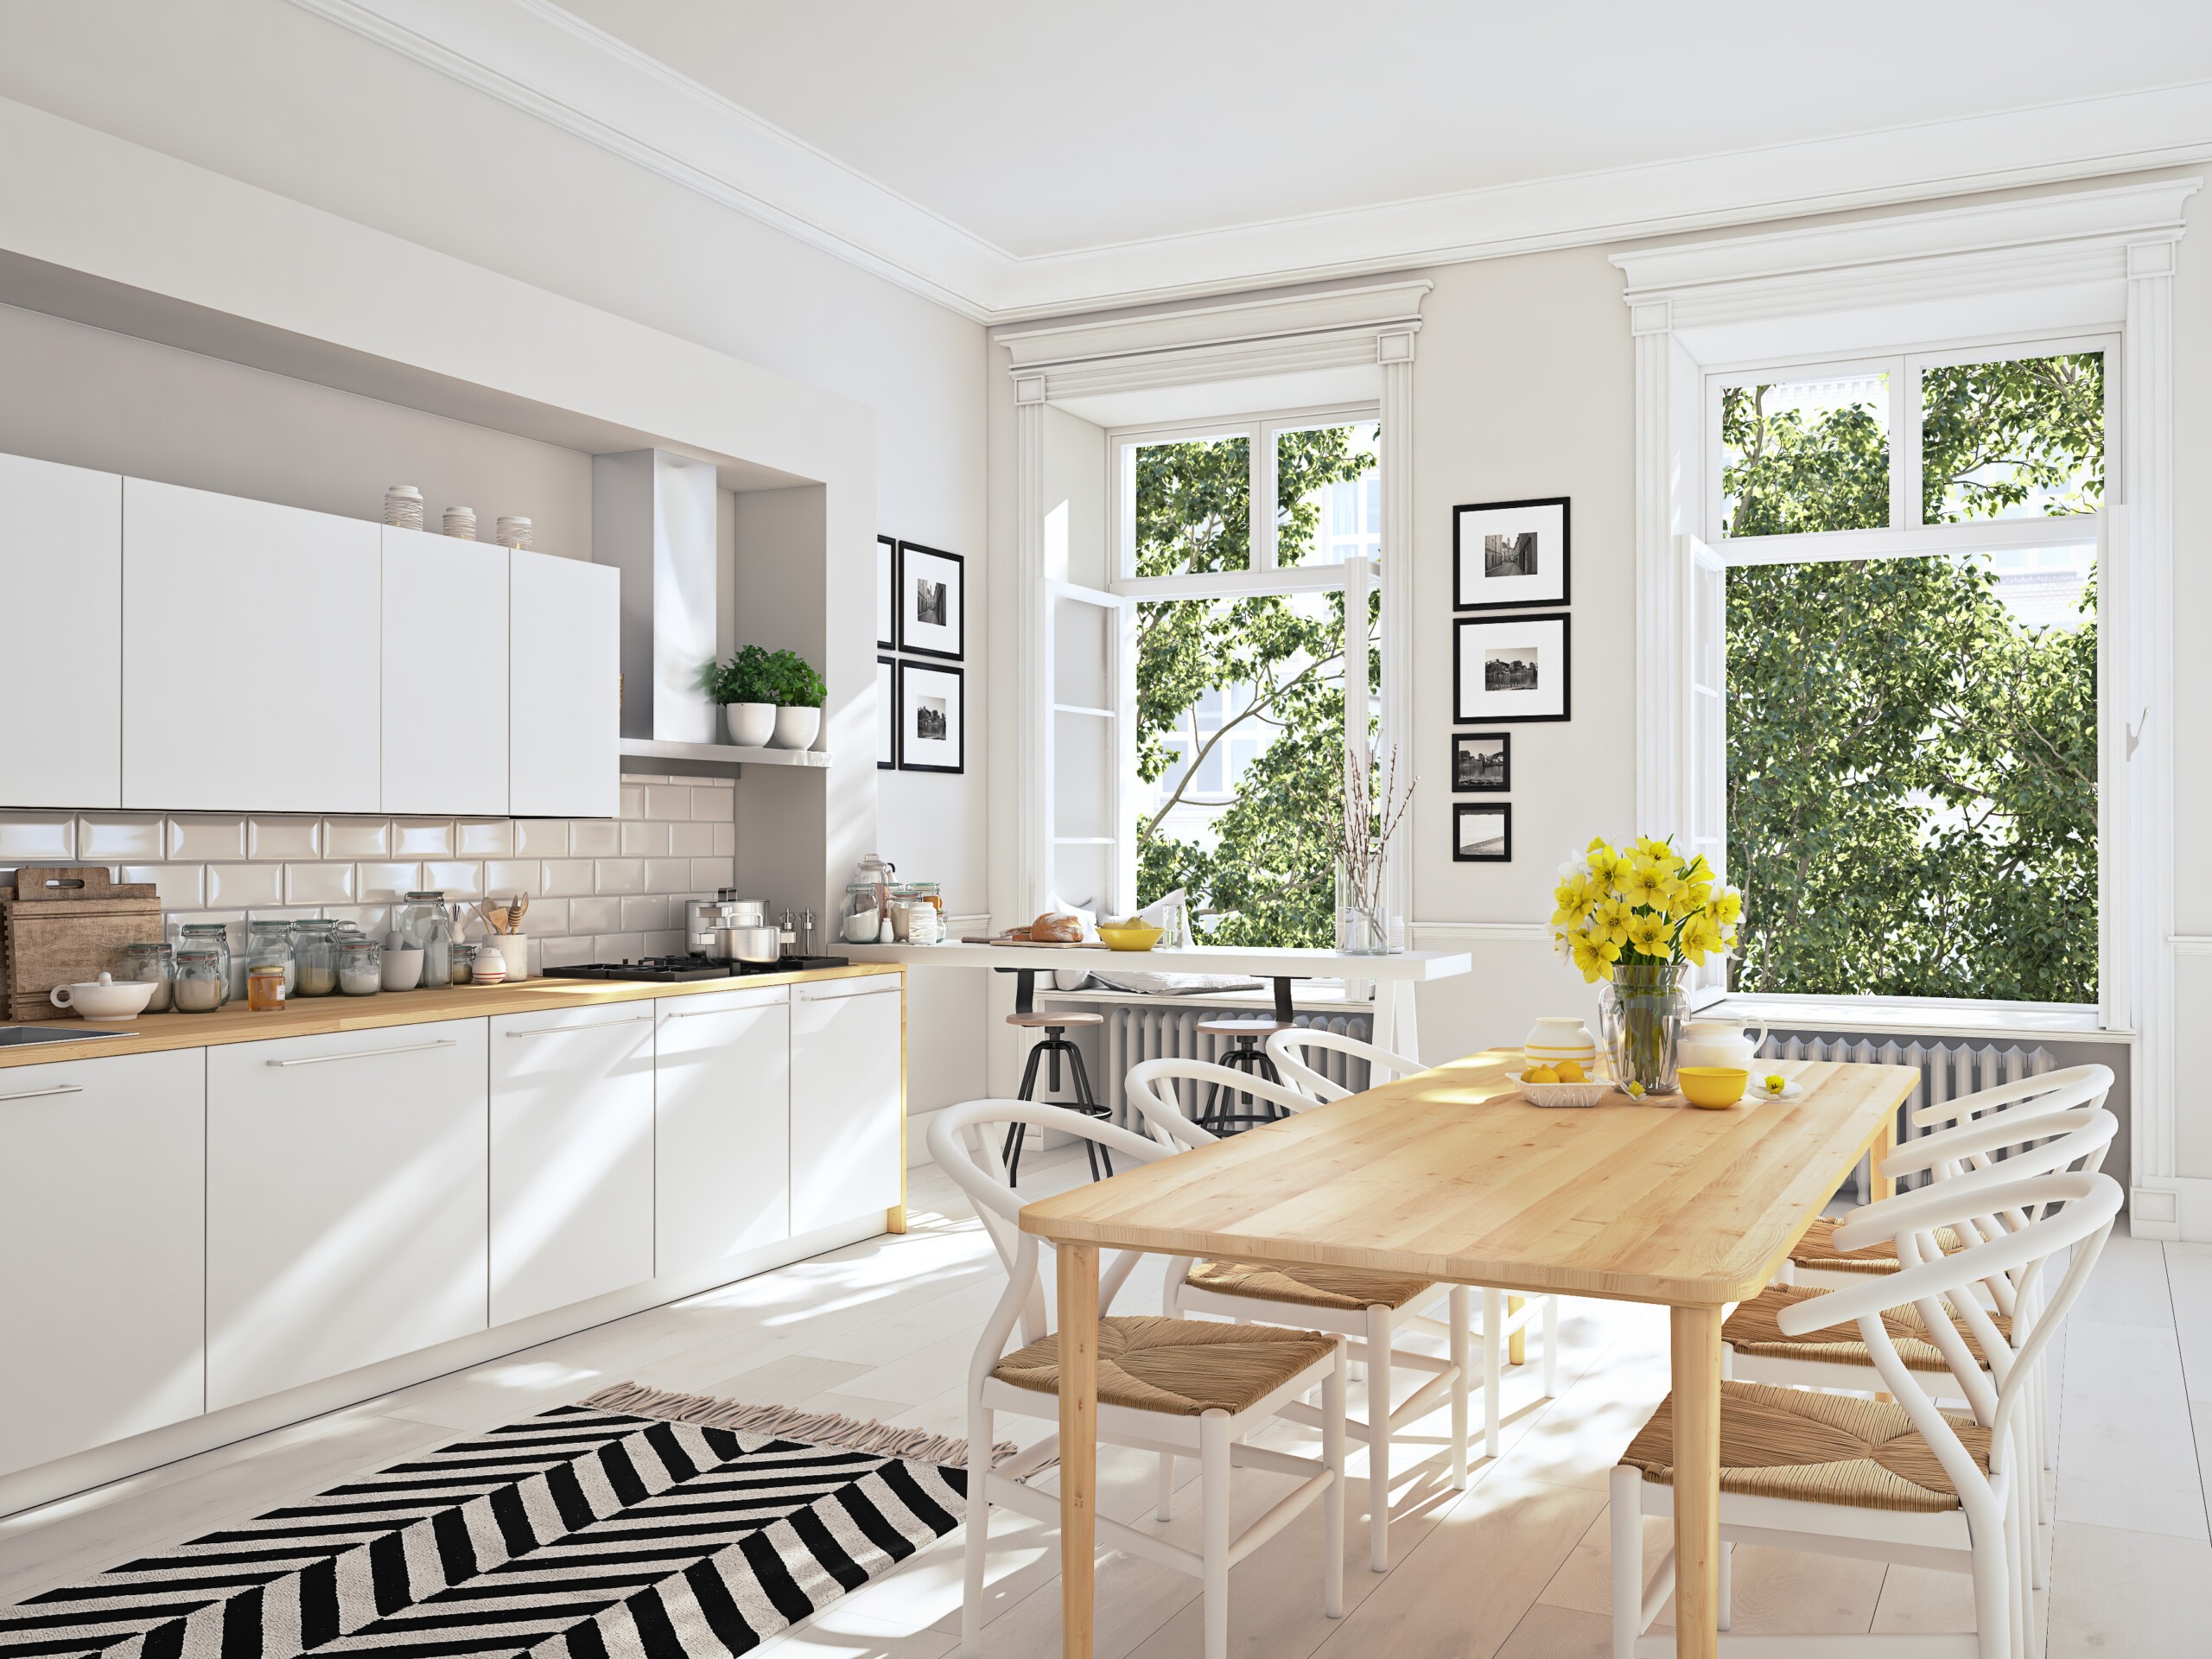 What is Nordic style in interior design?